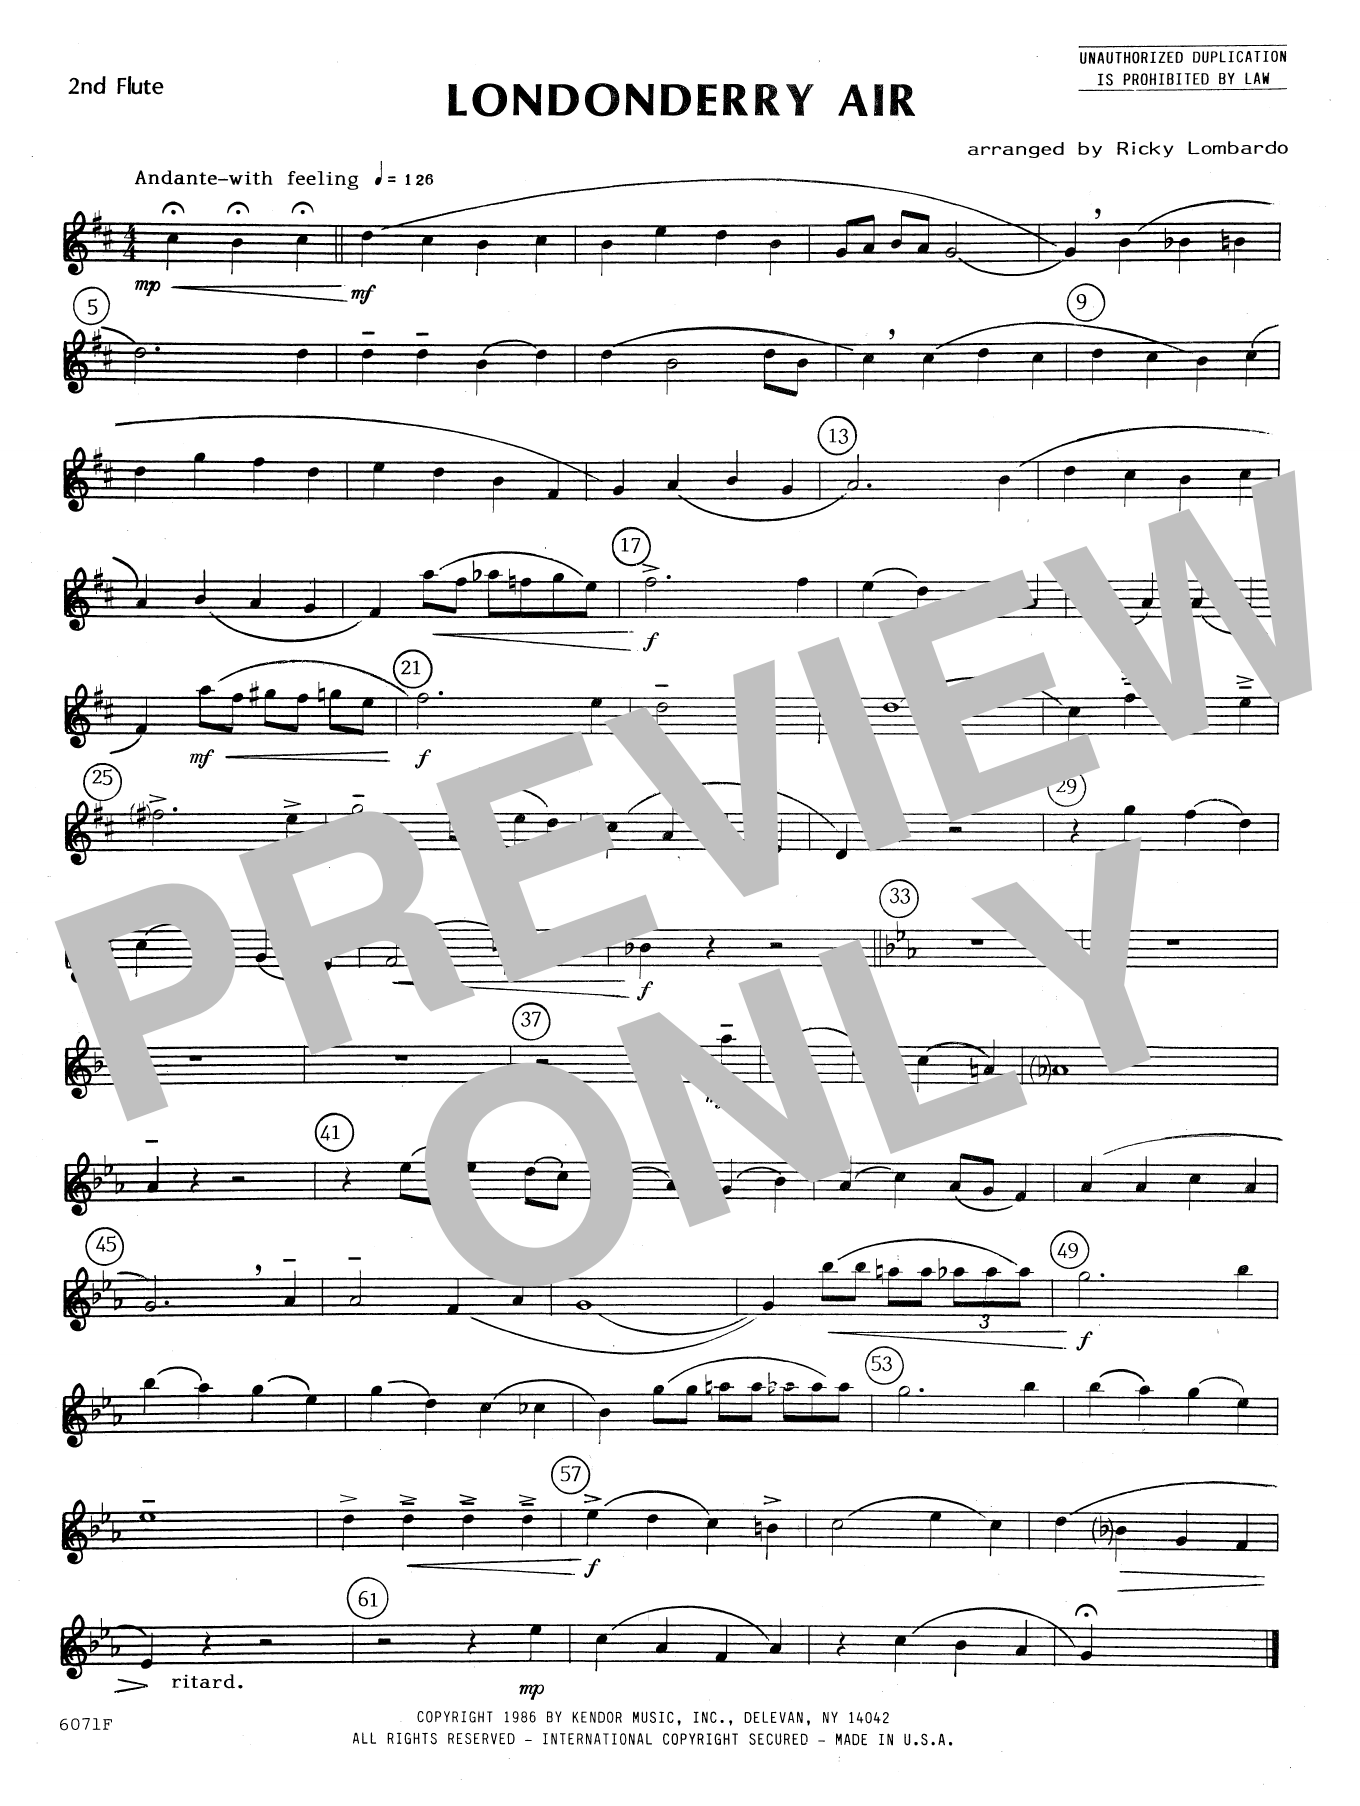 Download Lombardo Londonderry Air - 2nd Flute Sheet Music